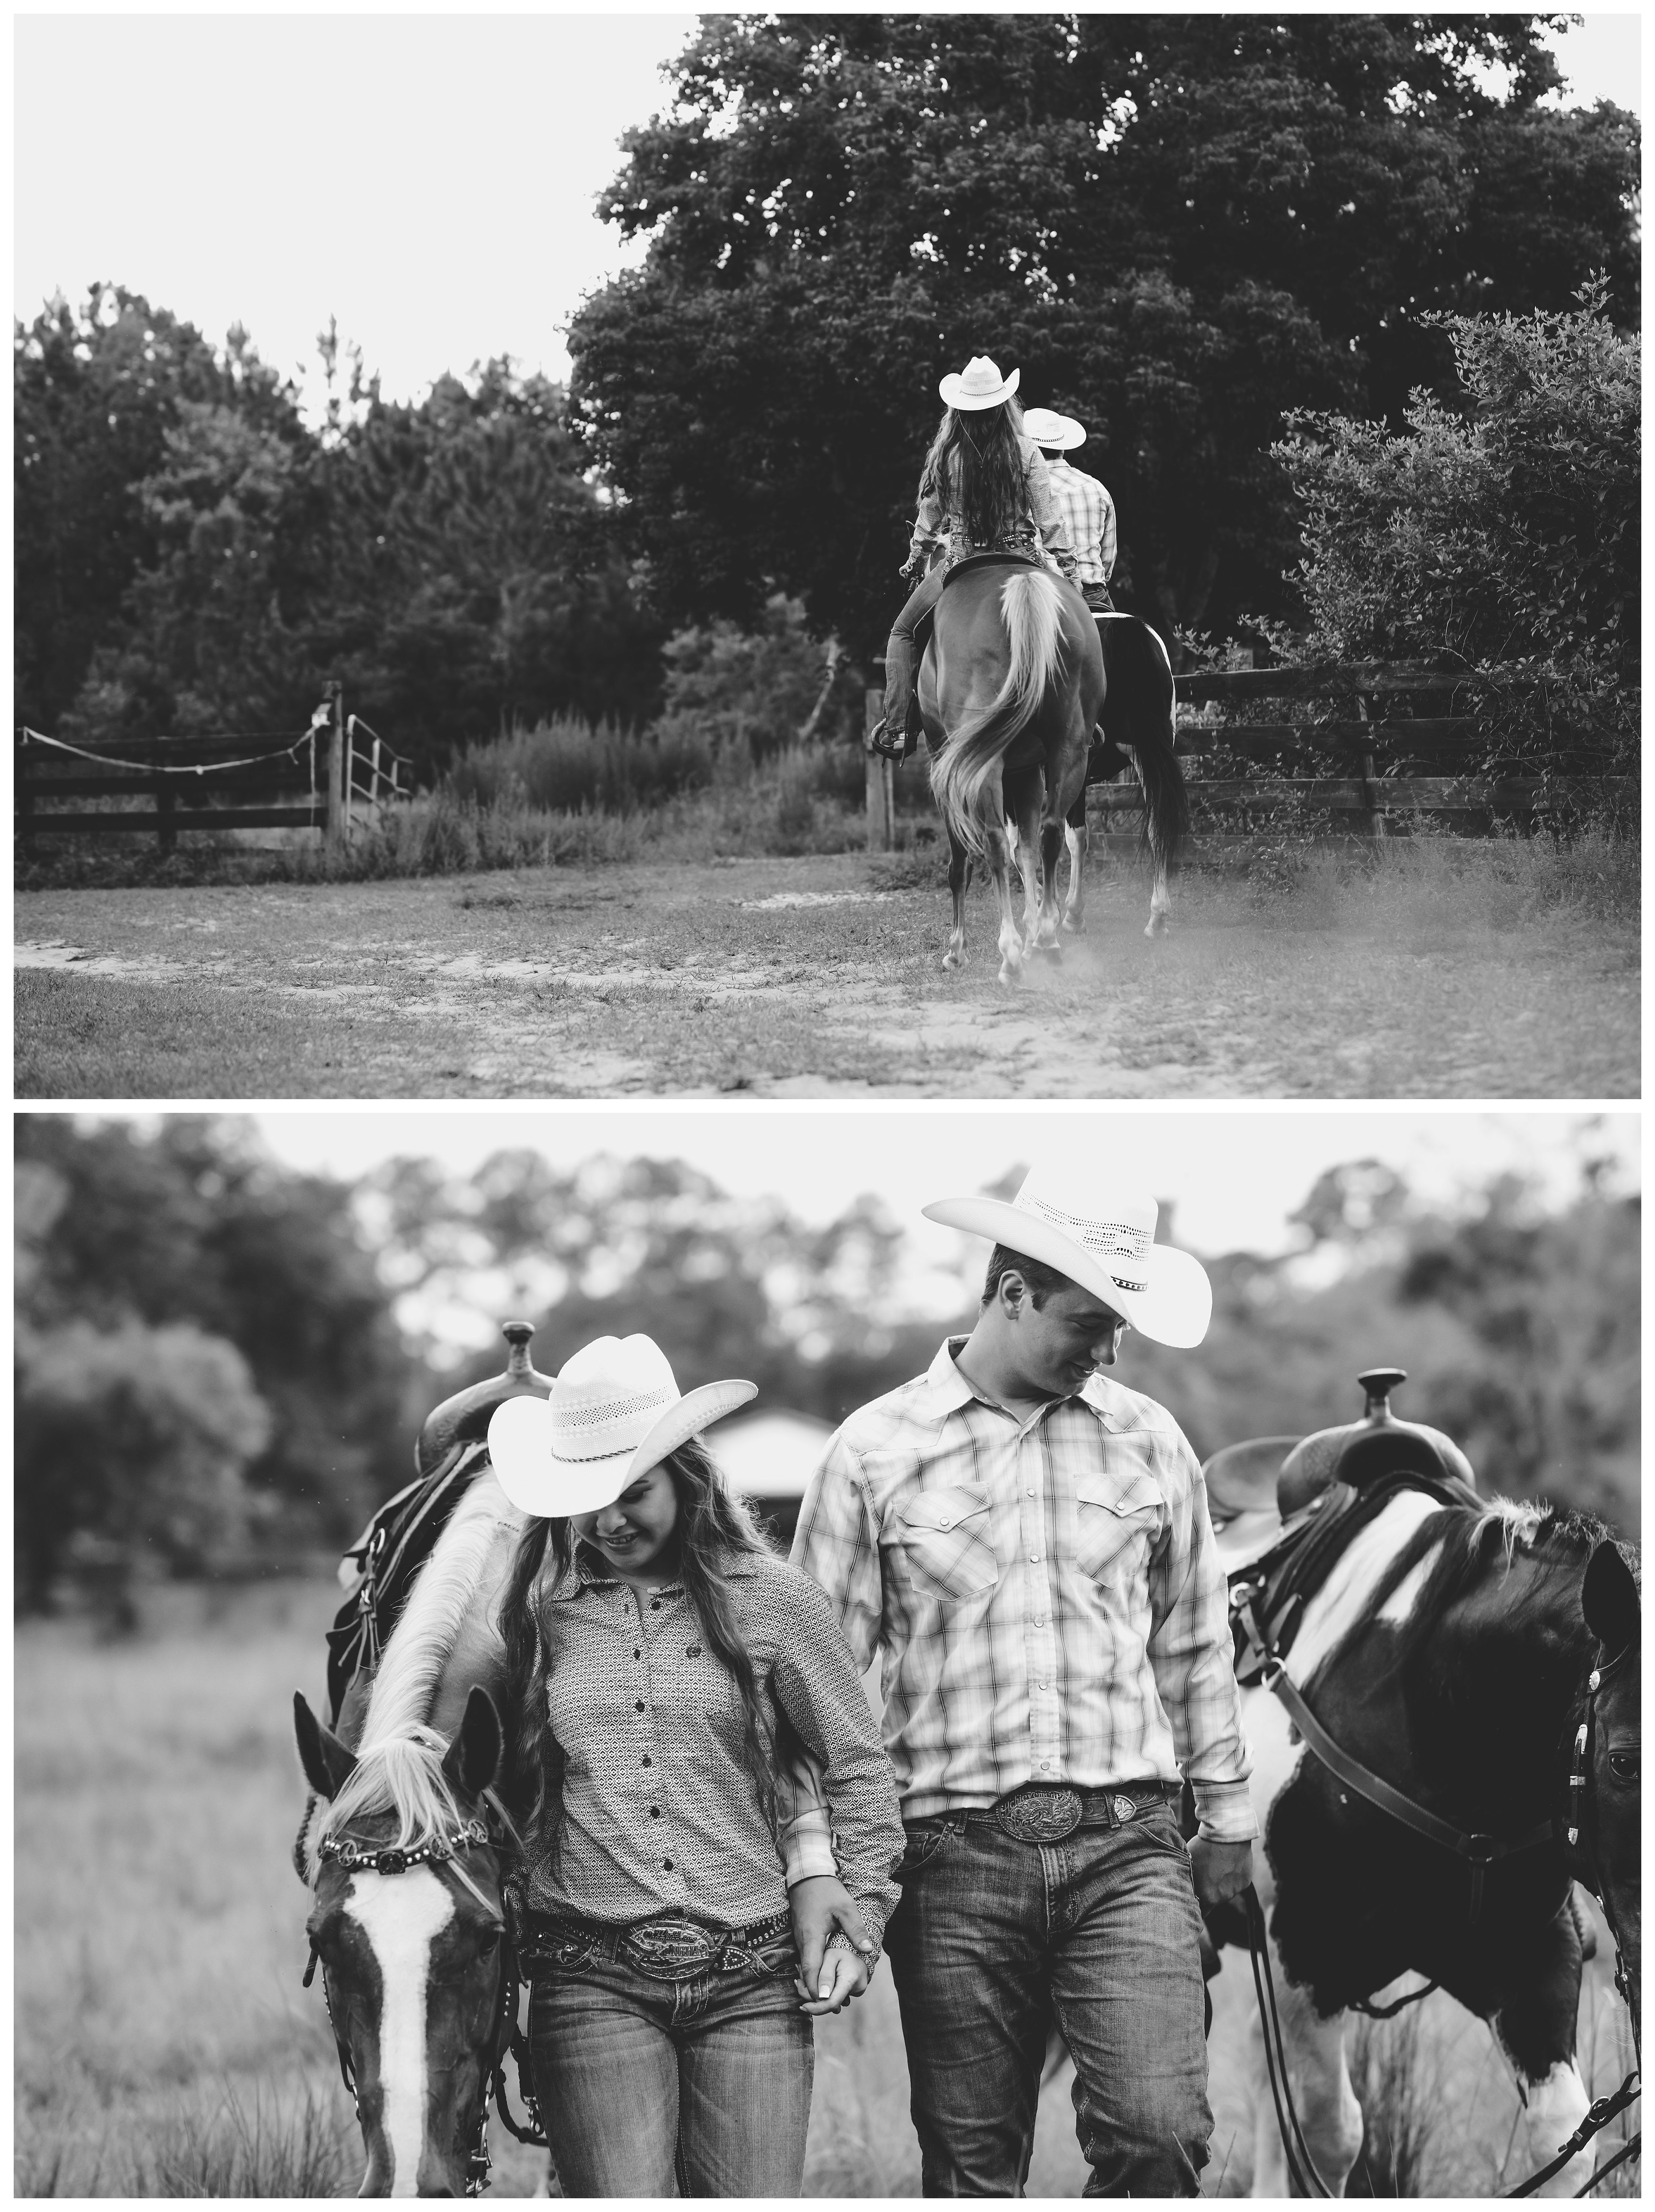 Western couples photography in Jacksonville, Florida by professional horse photographer.